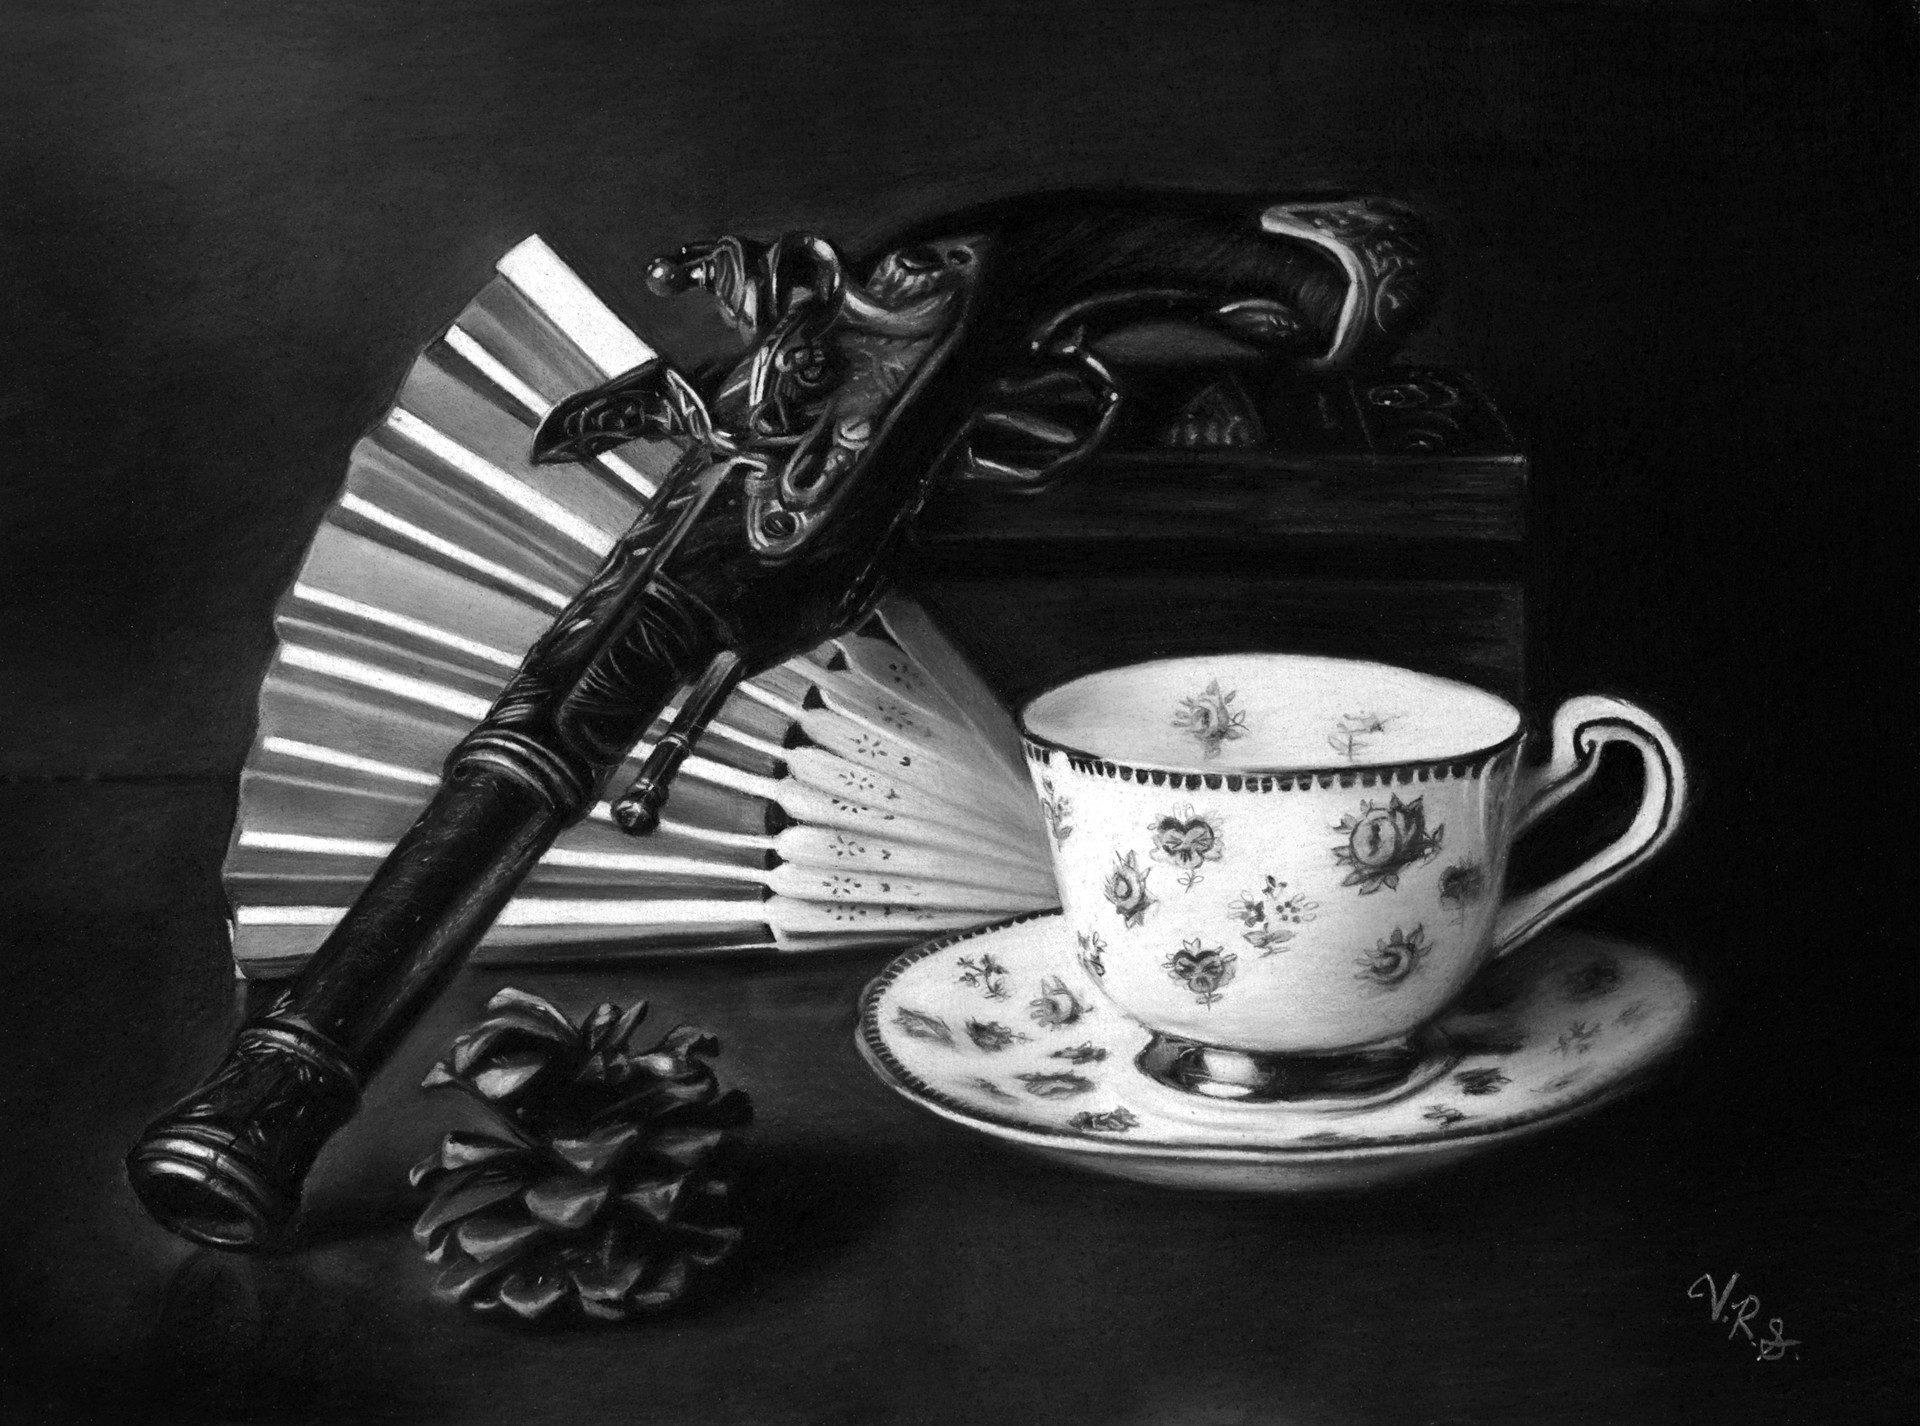 The Tea Party by Victoria Steel